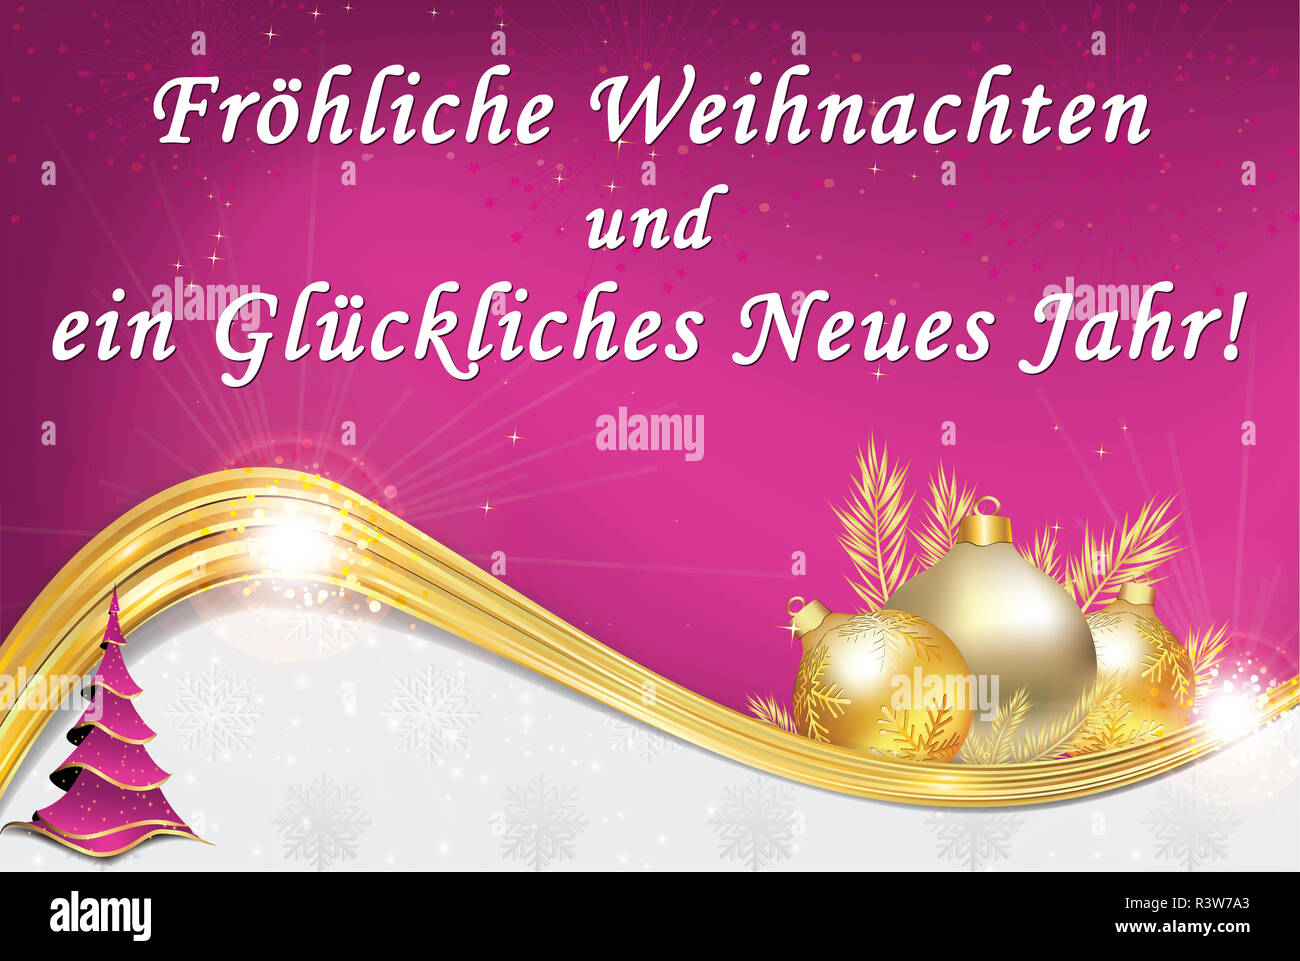 how to wish merry christmas and happy new year in german German